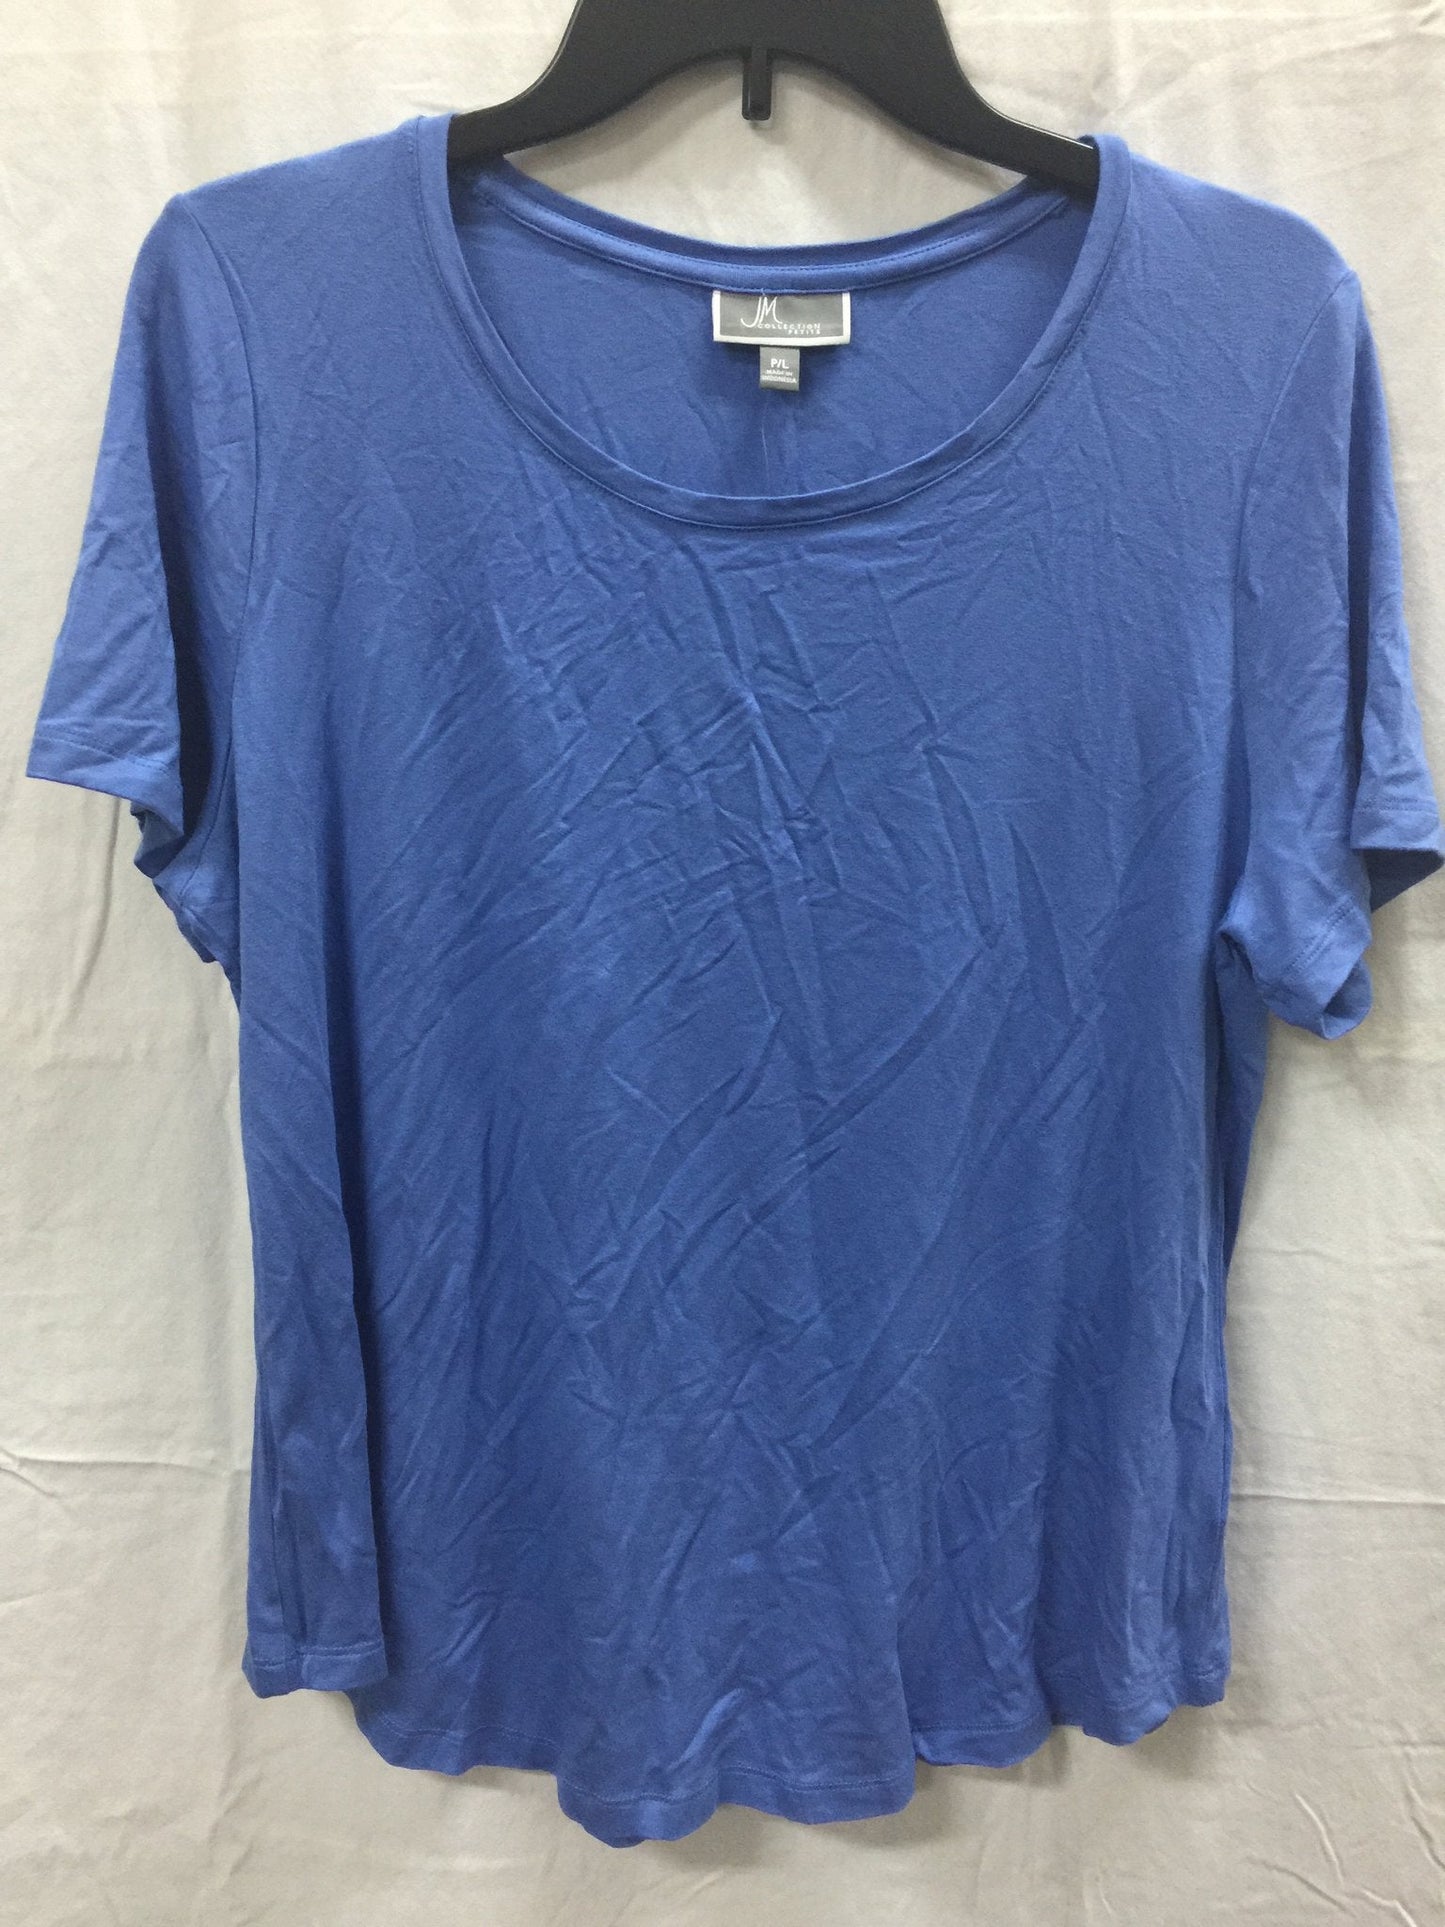 JM Collection Shortsleeve Solid Rayon Span Top Blue